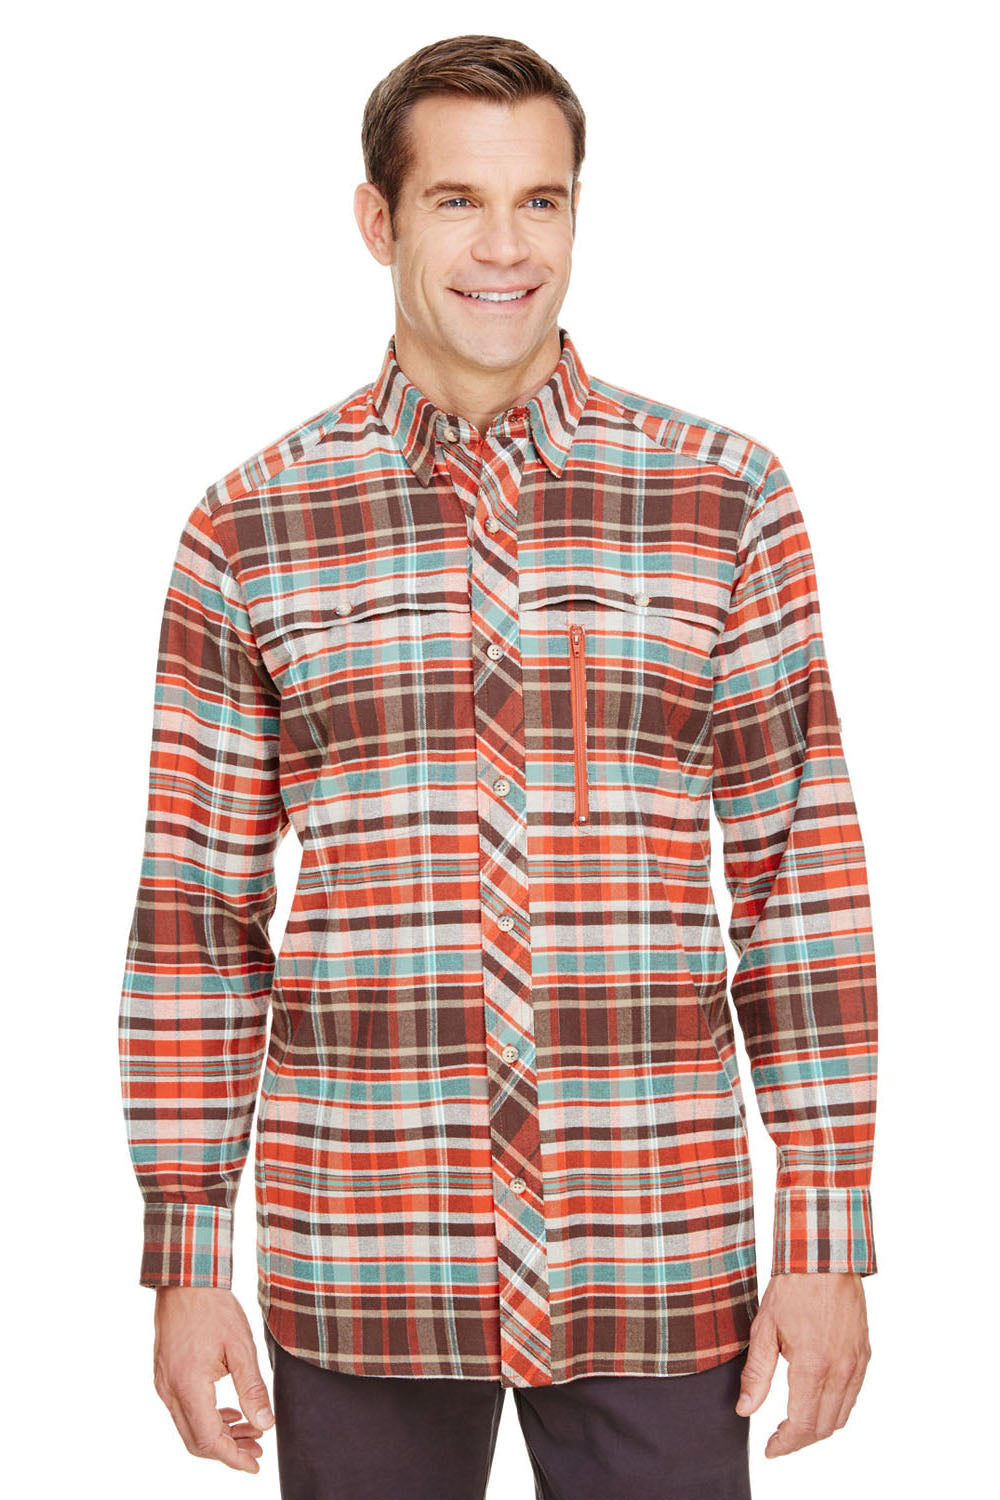 Backpacker BP7091 Mens Stretch Flannel Long Sleeve Button Down Shirt w/ Double Pockets Rust Red Front